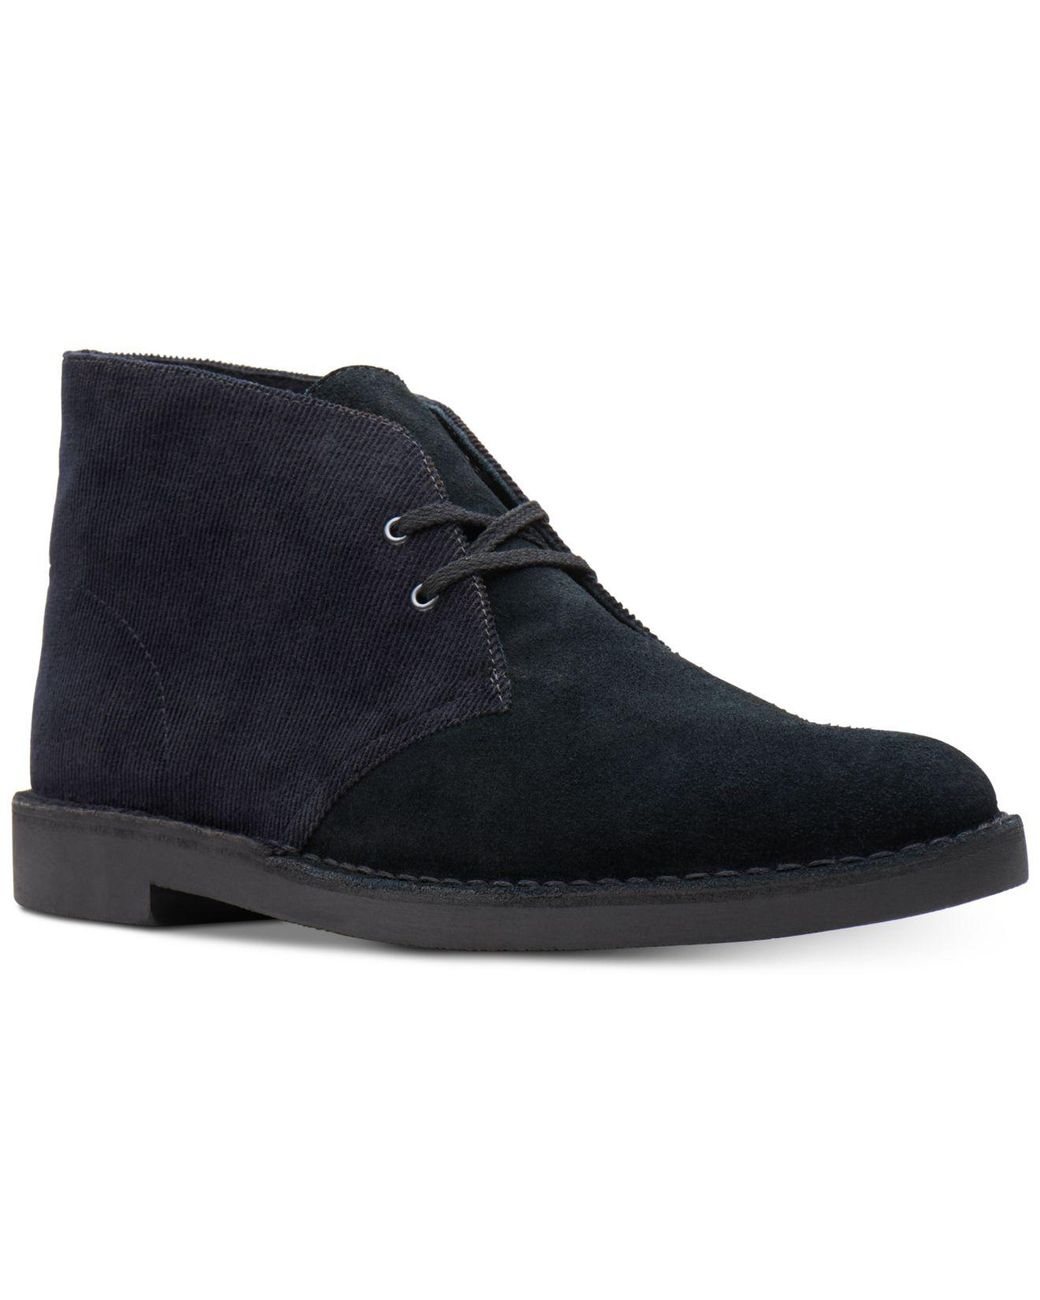 Clarks Limited Edition Corduroy Bushacre Chukka Boots, Created For Macy ...